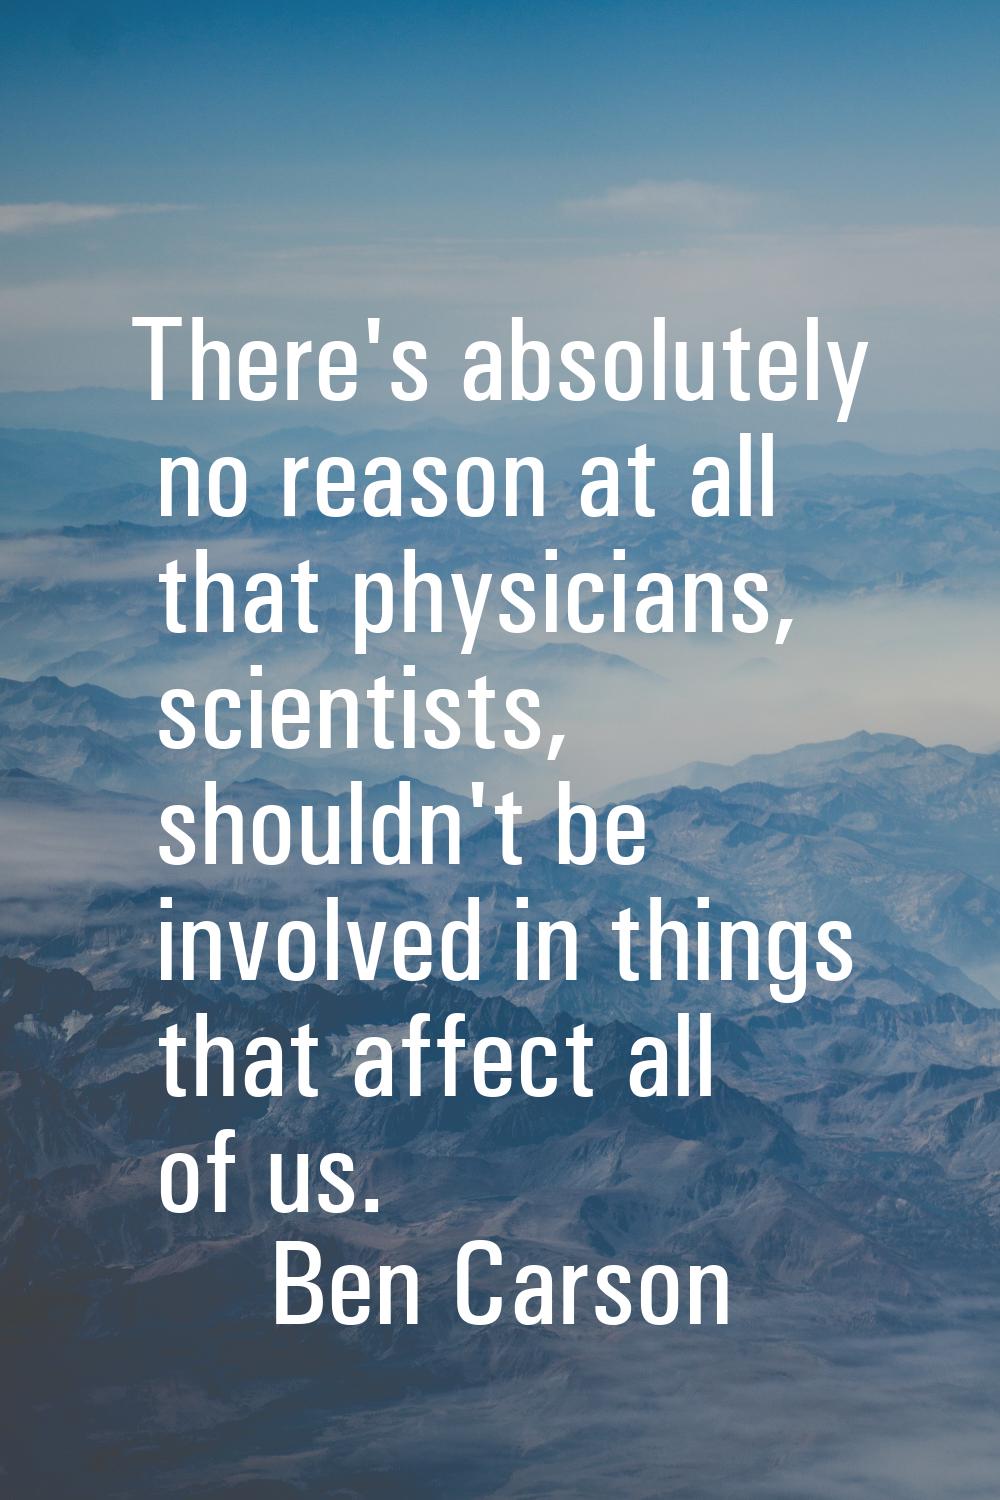 There's absolutely no reason at all that physicians, scientists, shouldn't be involved in things th